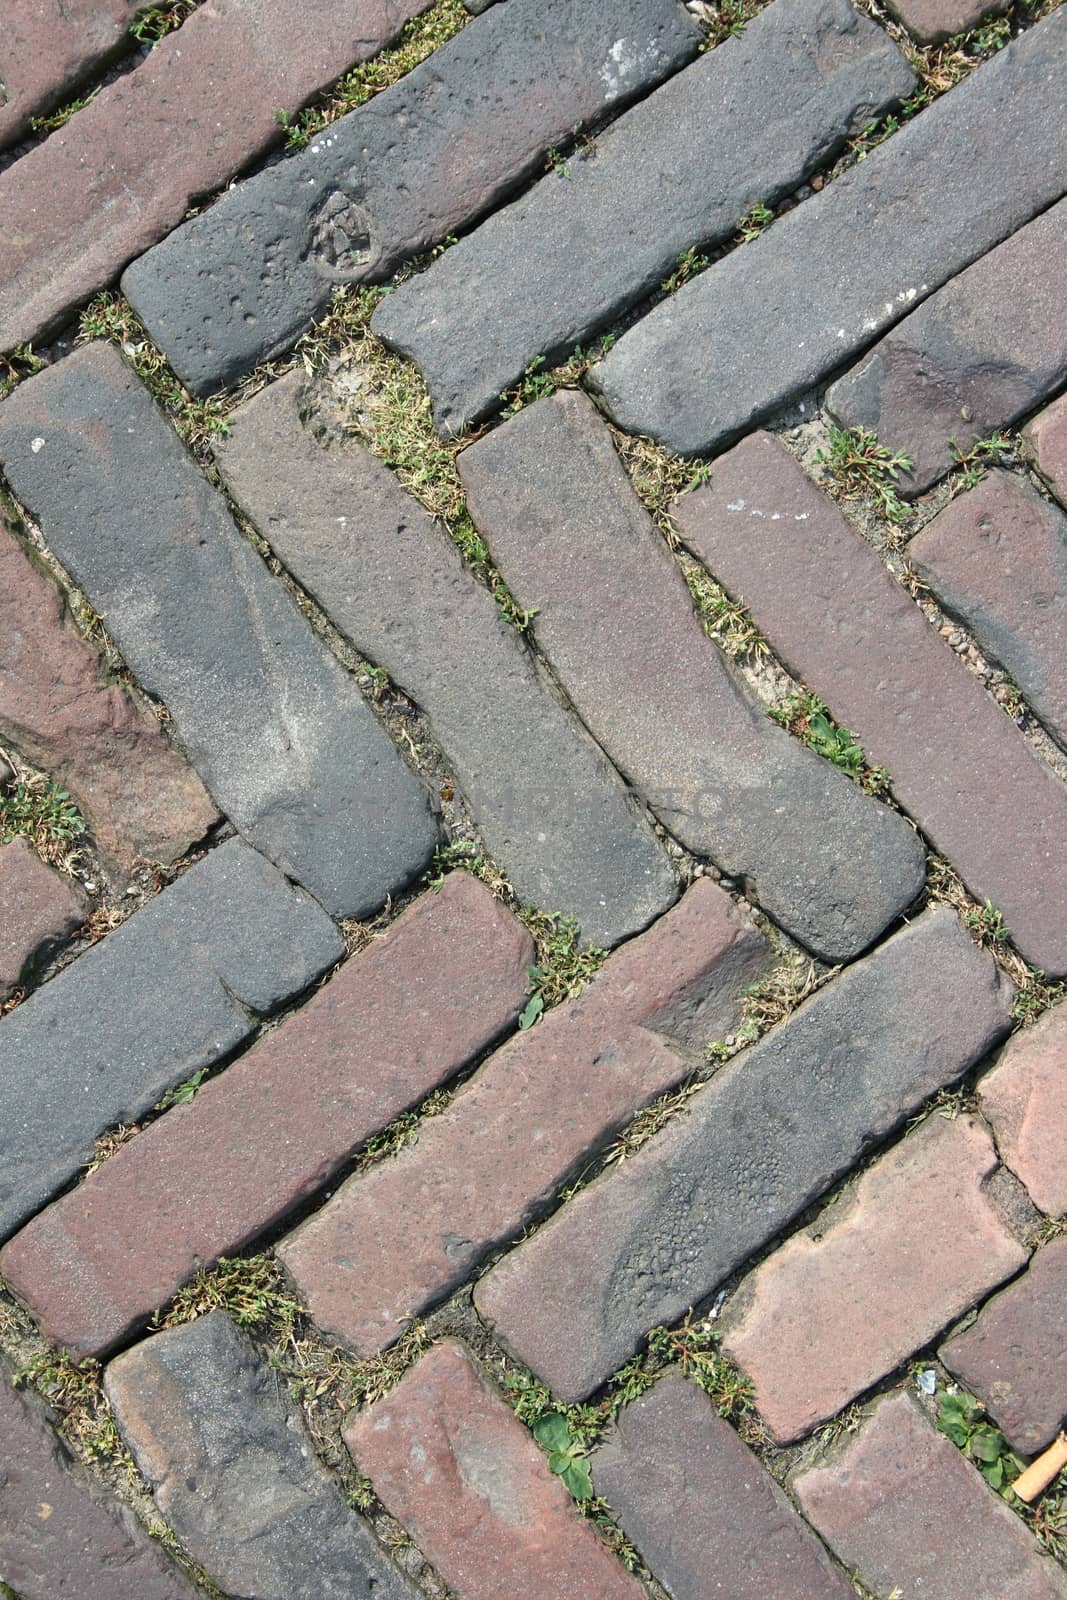 With rectangular colored stones laid pavement